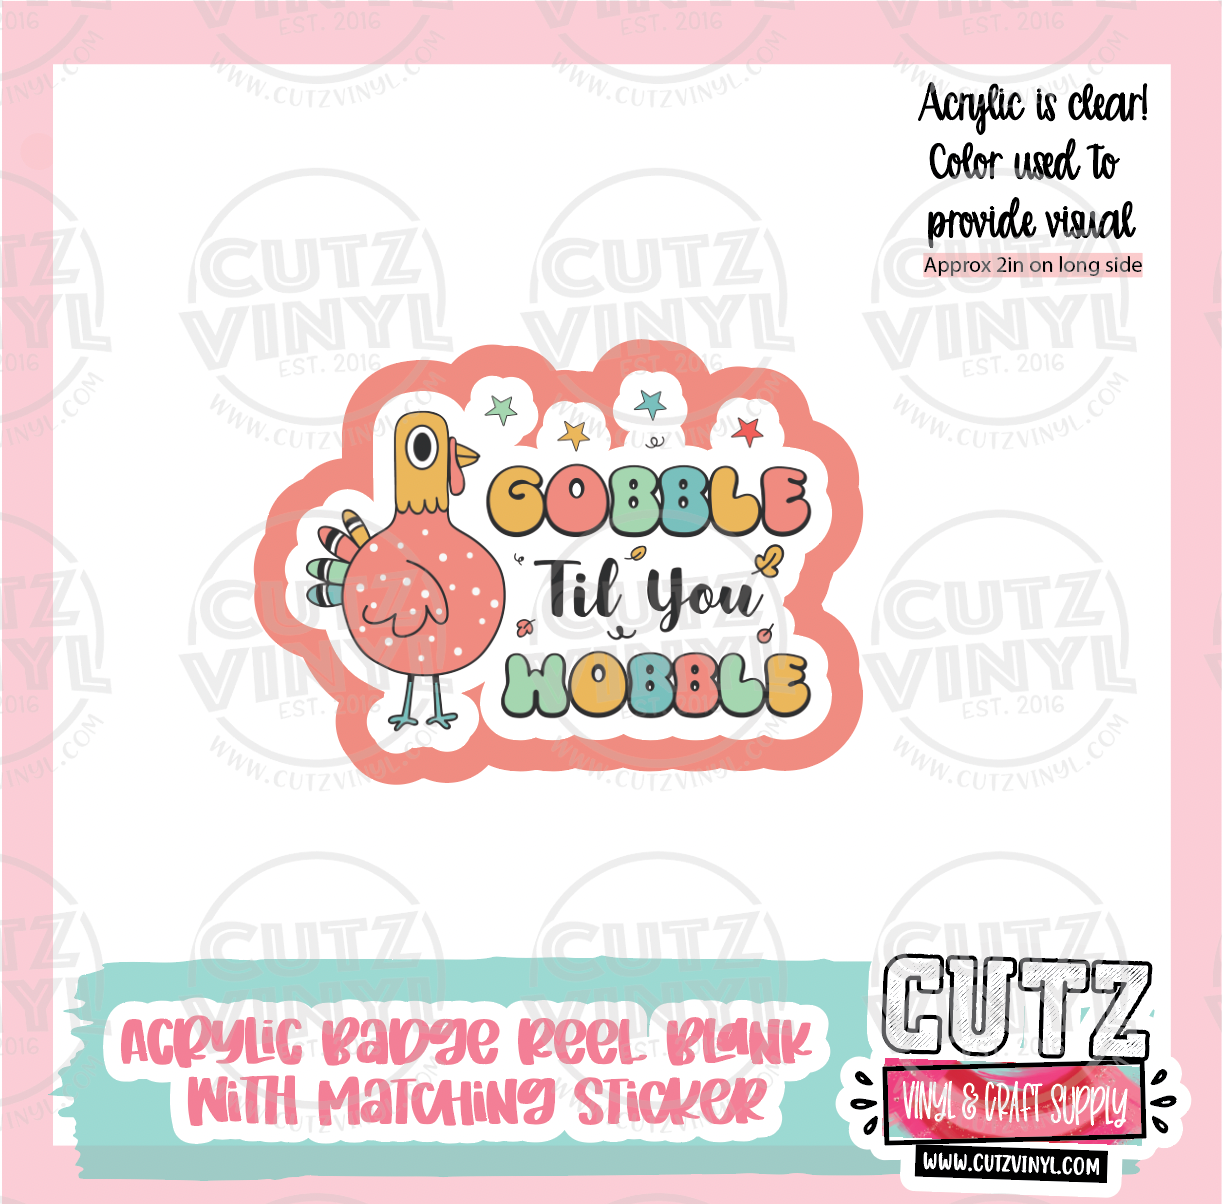 Gobble Til you Wobble - Acrylic Badge Reel Blank and Matching Sticker